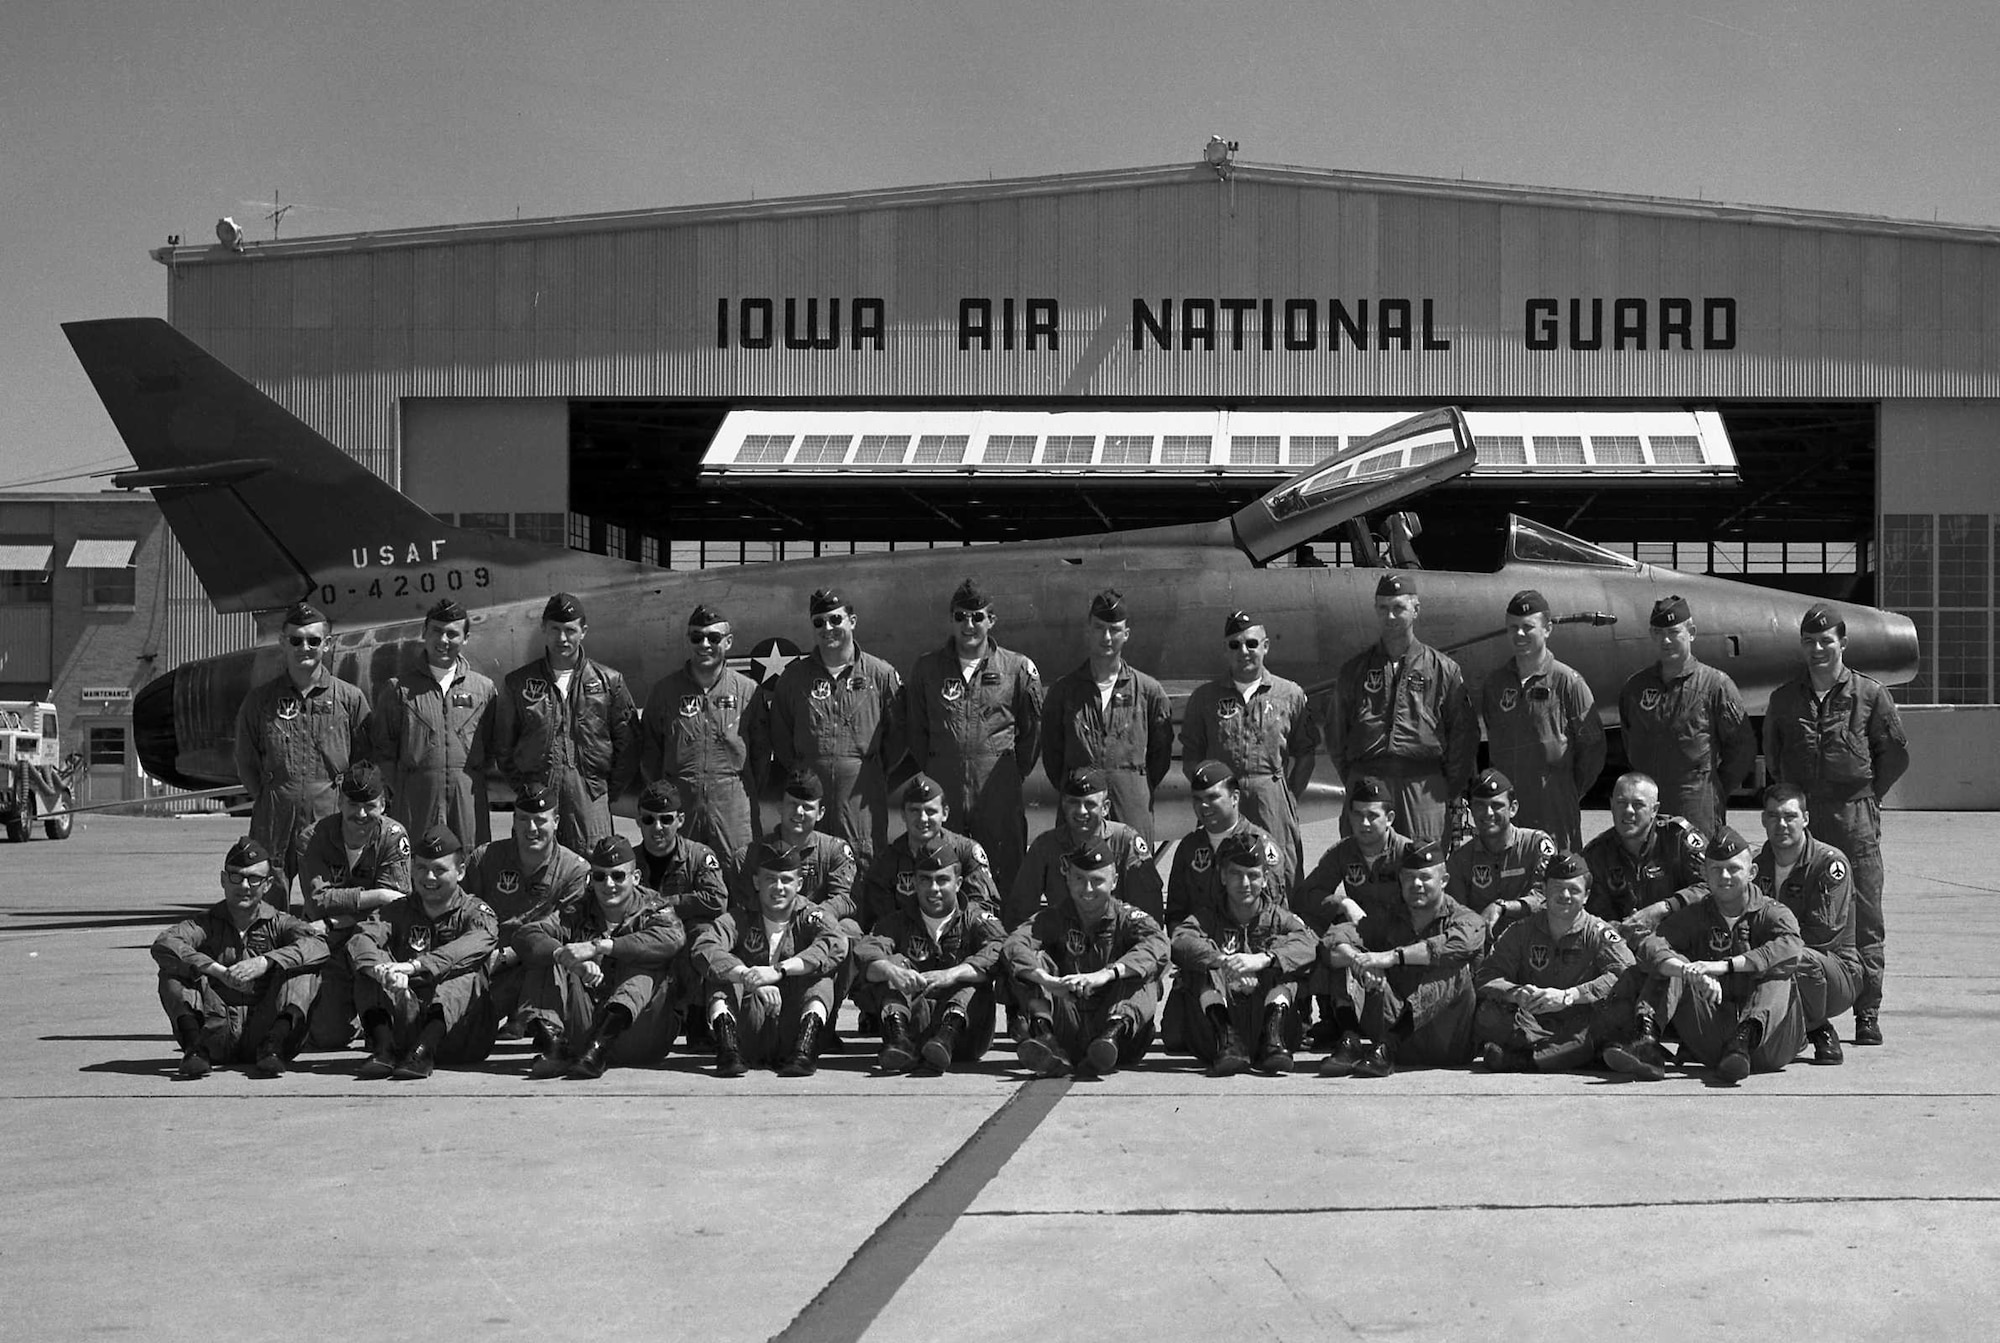 F-100 pilots from the 185th Tactical Fighter Group pose in front an F-100 Super Saber at the Air National Guard Base in Sioux City, Iowa. The 174th Tactical Fighter Squadron was activated and sent to Vietnam in January 1968 and returned to Sioux City in May 1969. The photo was taken prior to 1968.